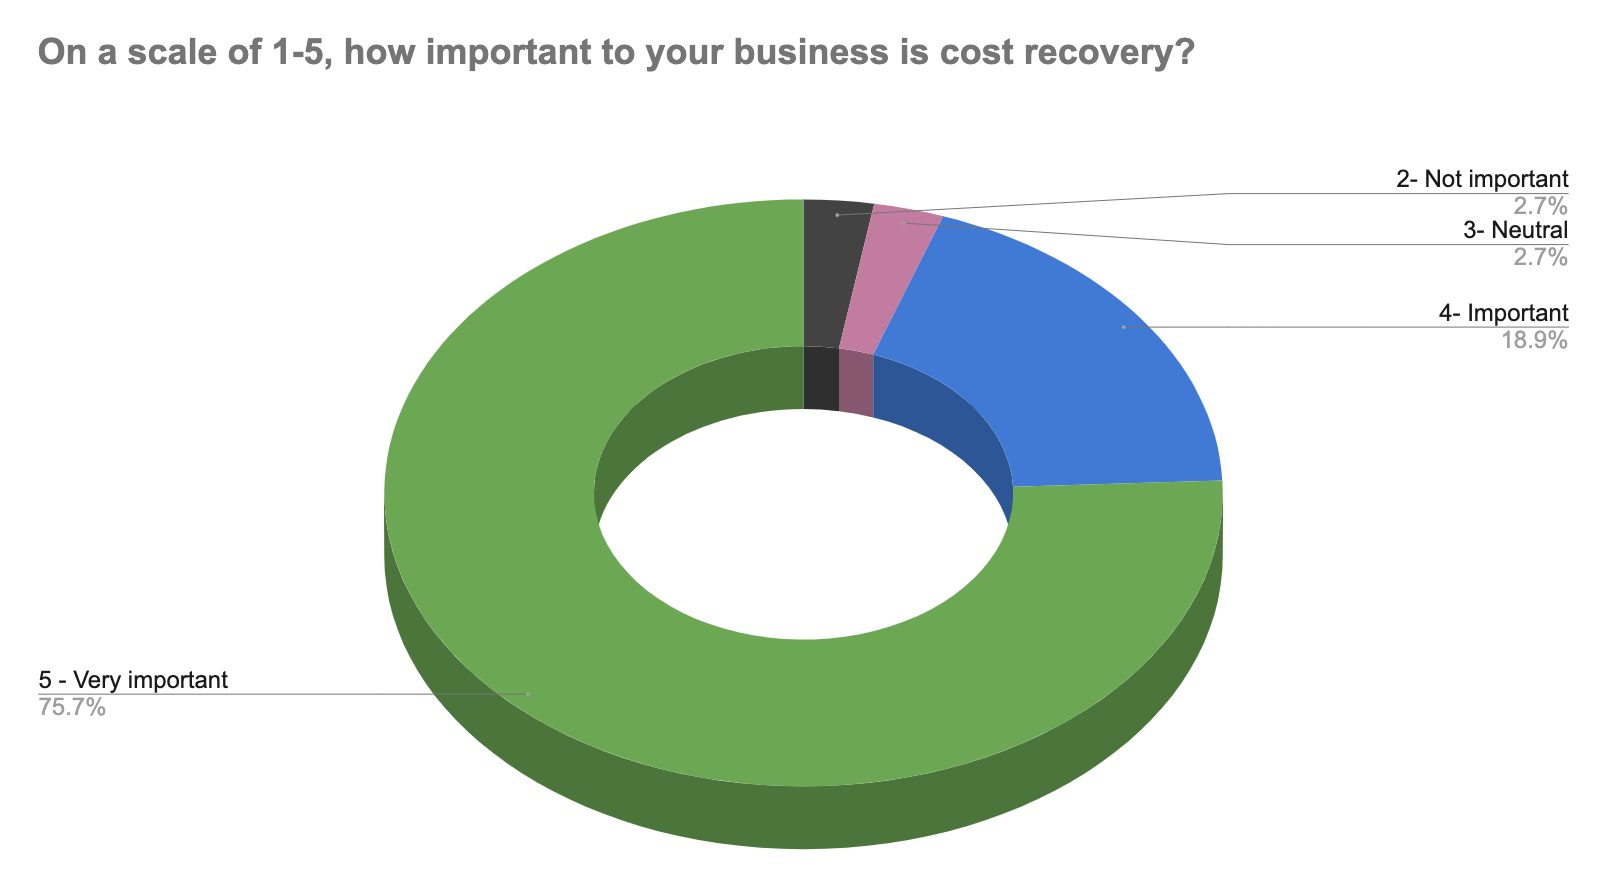 A chart showing how webinar attendees responded to a question about the importance of cost recovery to their business. 75.7% said recovering costs was very important. Another 19% said it was important. About 3% were neutral, and another 3% said cost recovery was not important to their business.